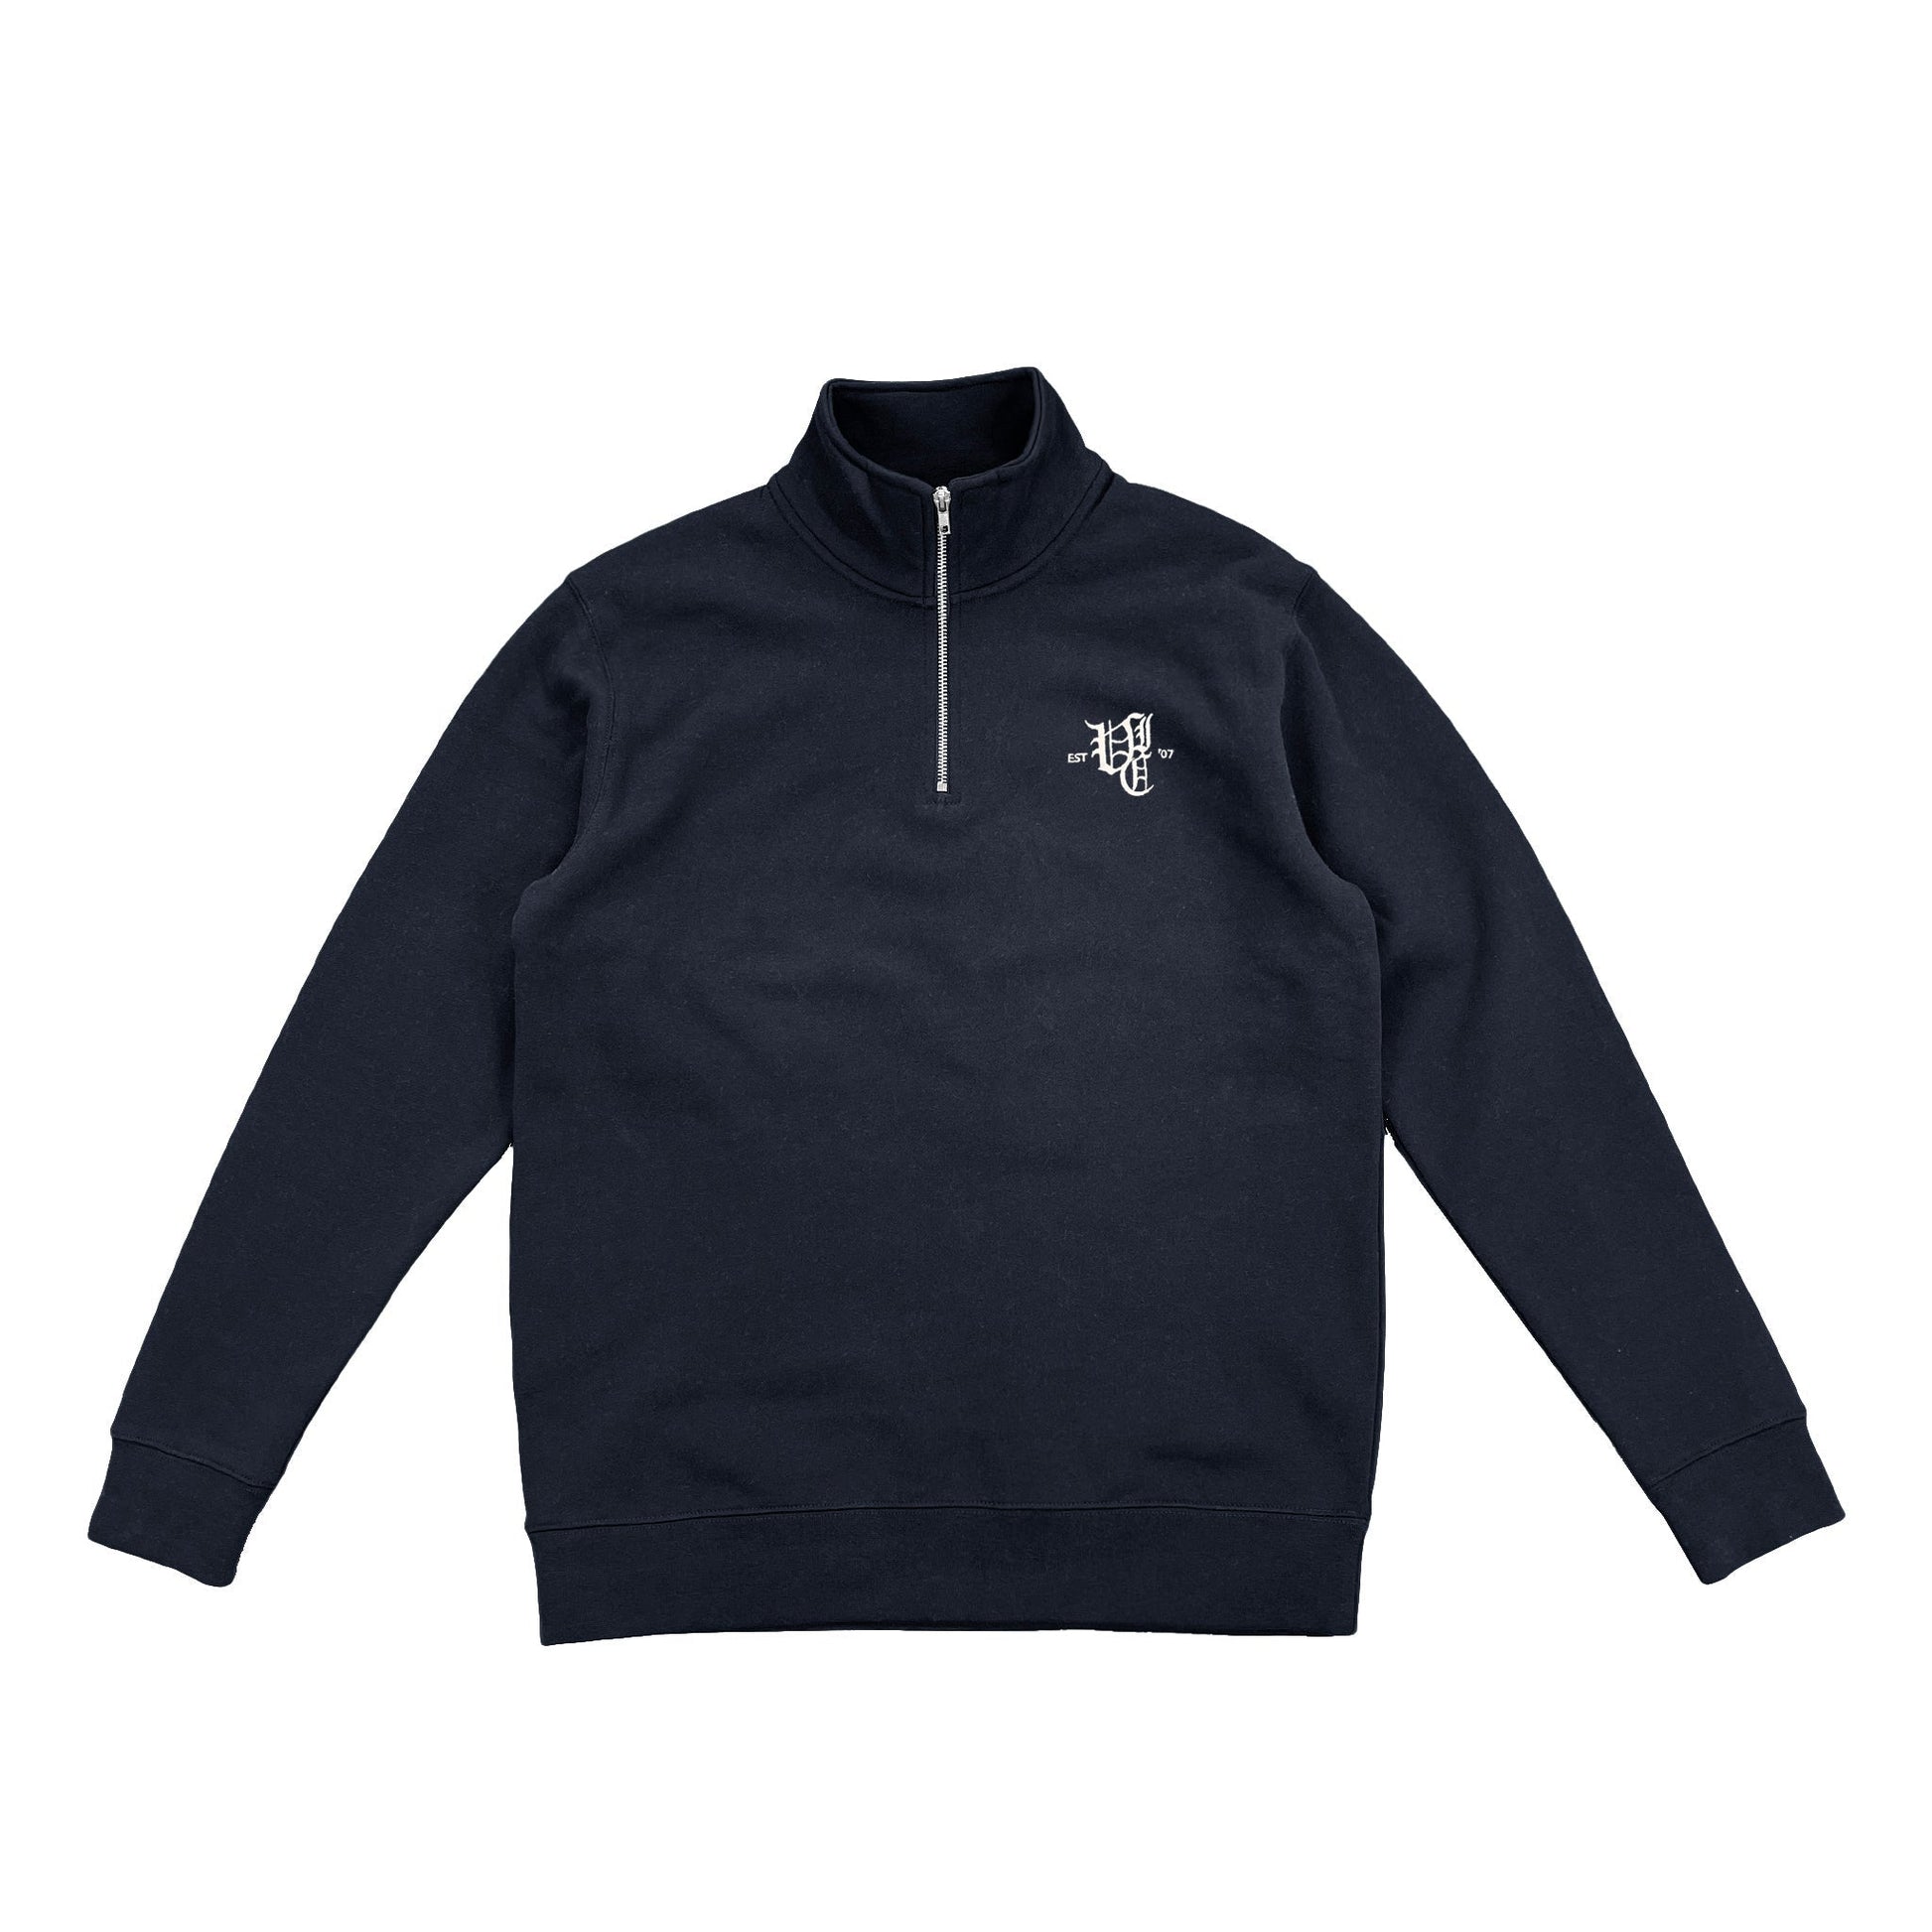 Elevate your style with the OL' ENGLISH 1/4 ZIP CREW. This piece combines vintage charm and modern streetwear, featuring a regular fit, heavyweight 350 GSM fabric for warmth, and a mock neck for added sophistication. The embroidered logo highlights its retro appeal. Perfect for any casual outing, embrace the timeless look with this essential addition to your wardrobe.